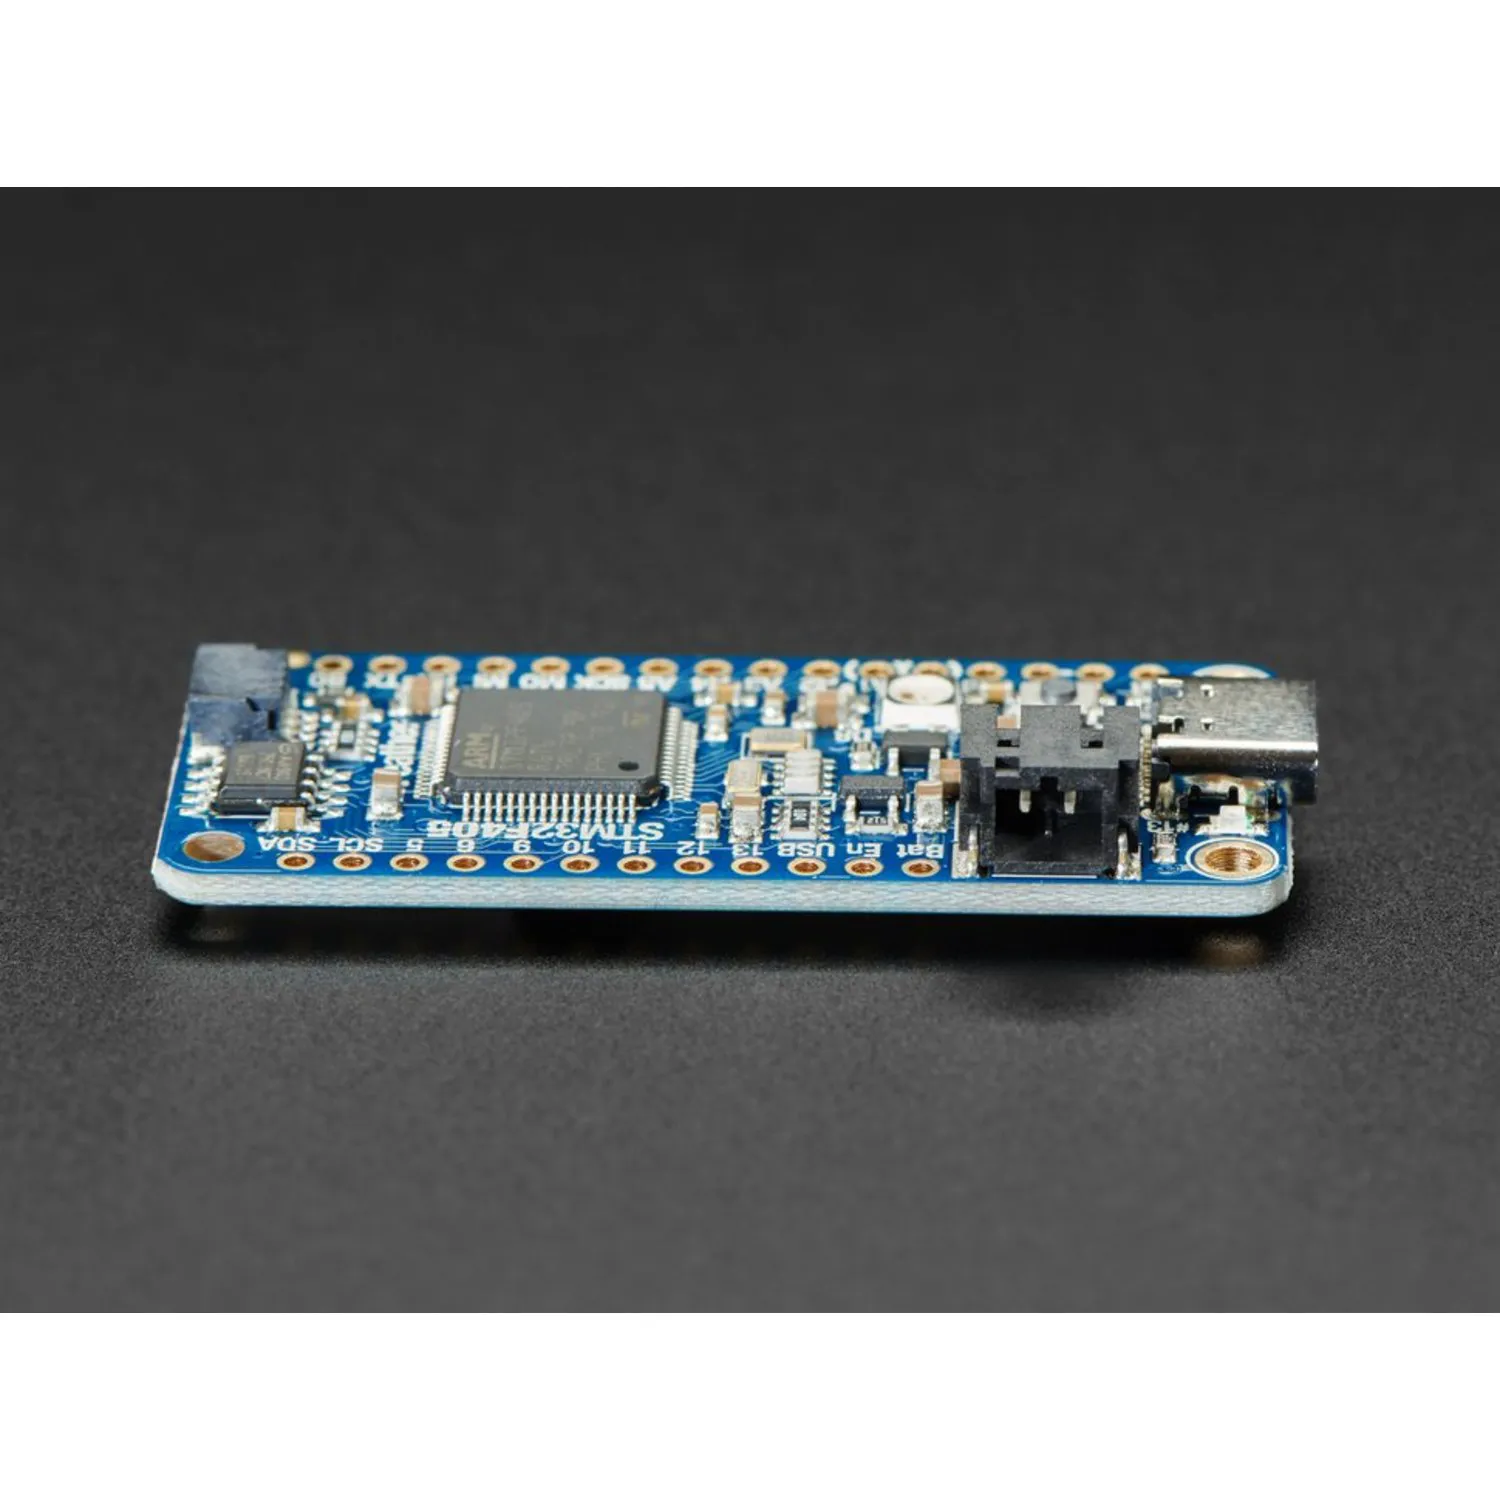 Photo of Adafruit Feather STM32F405 Express